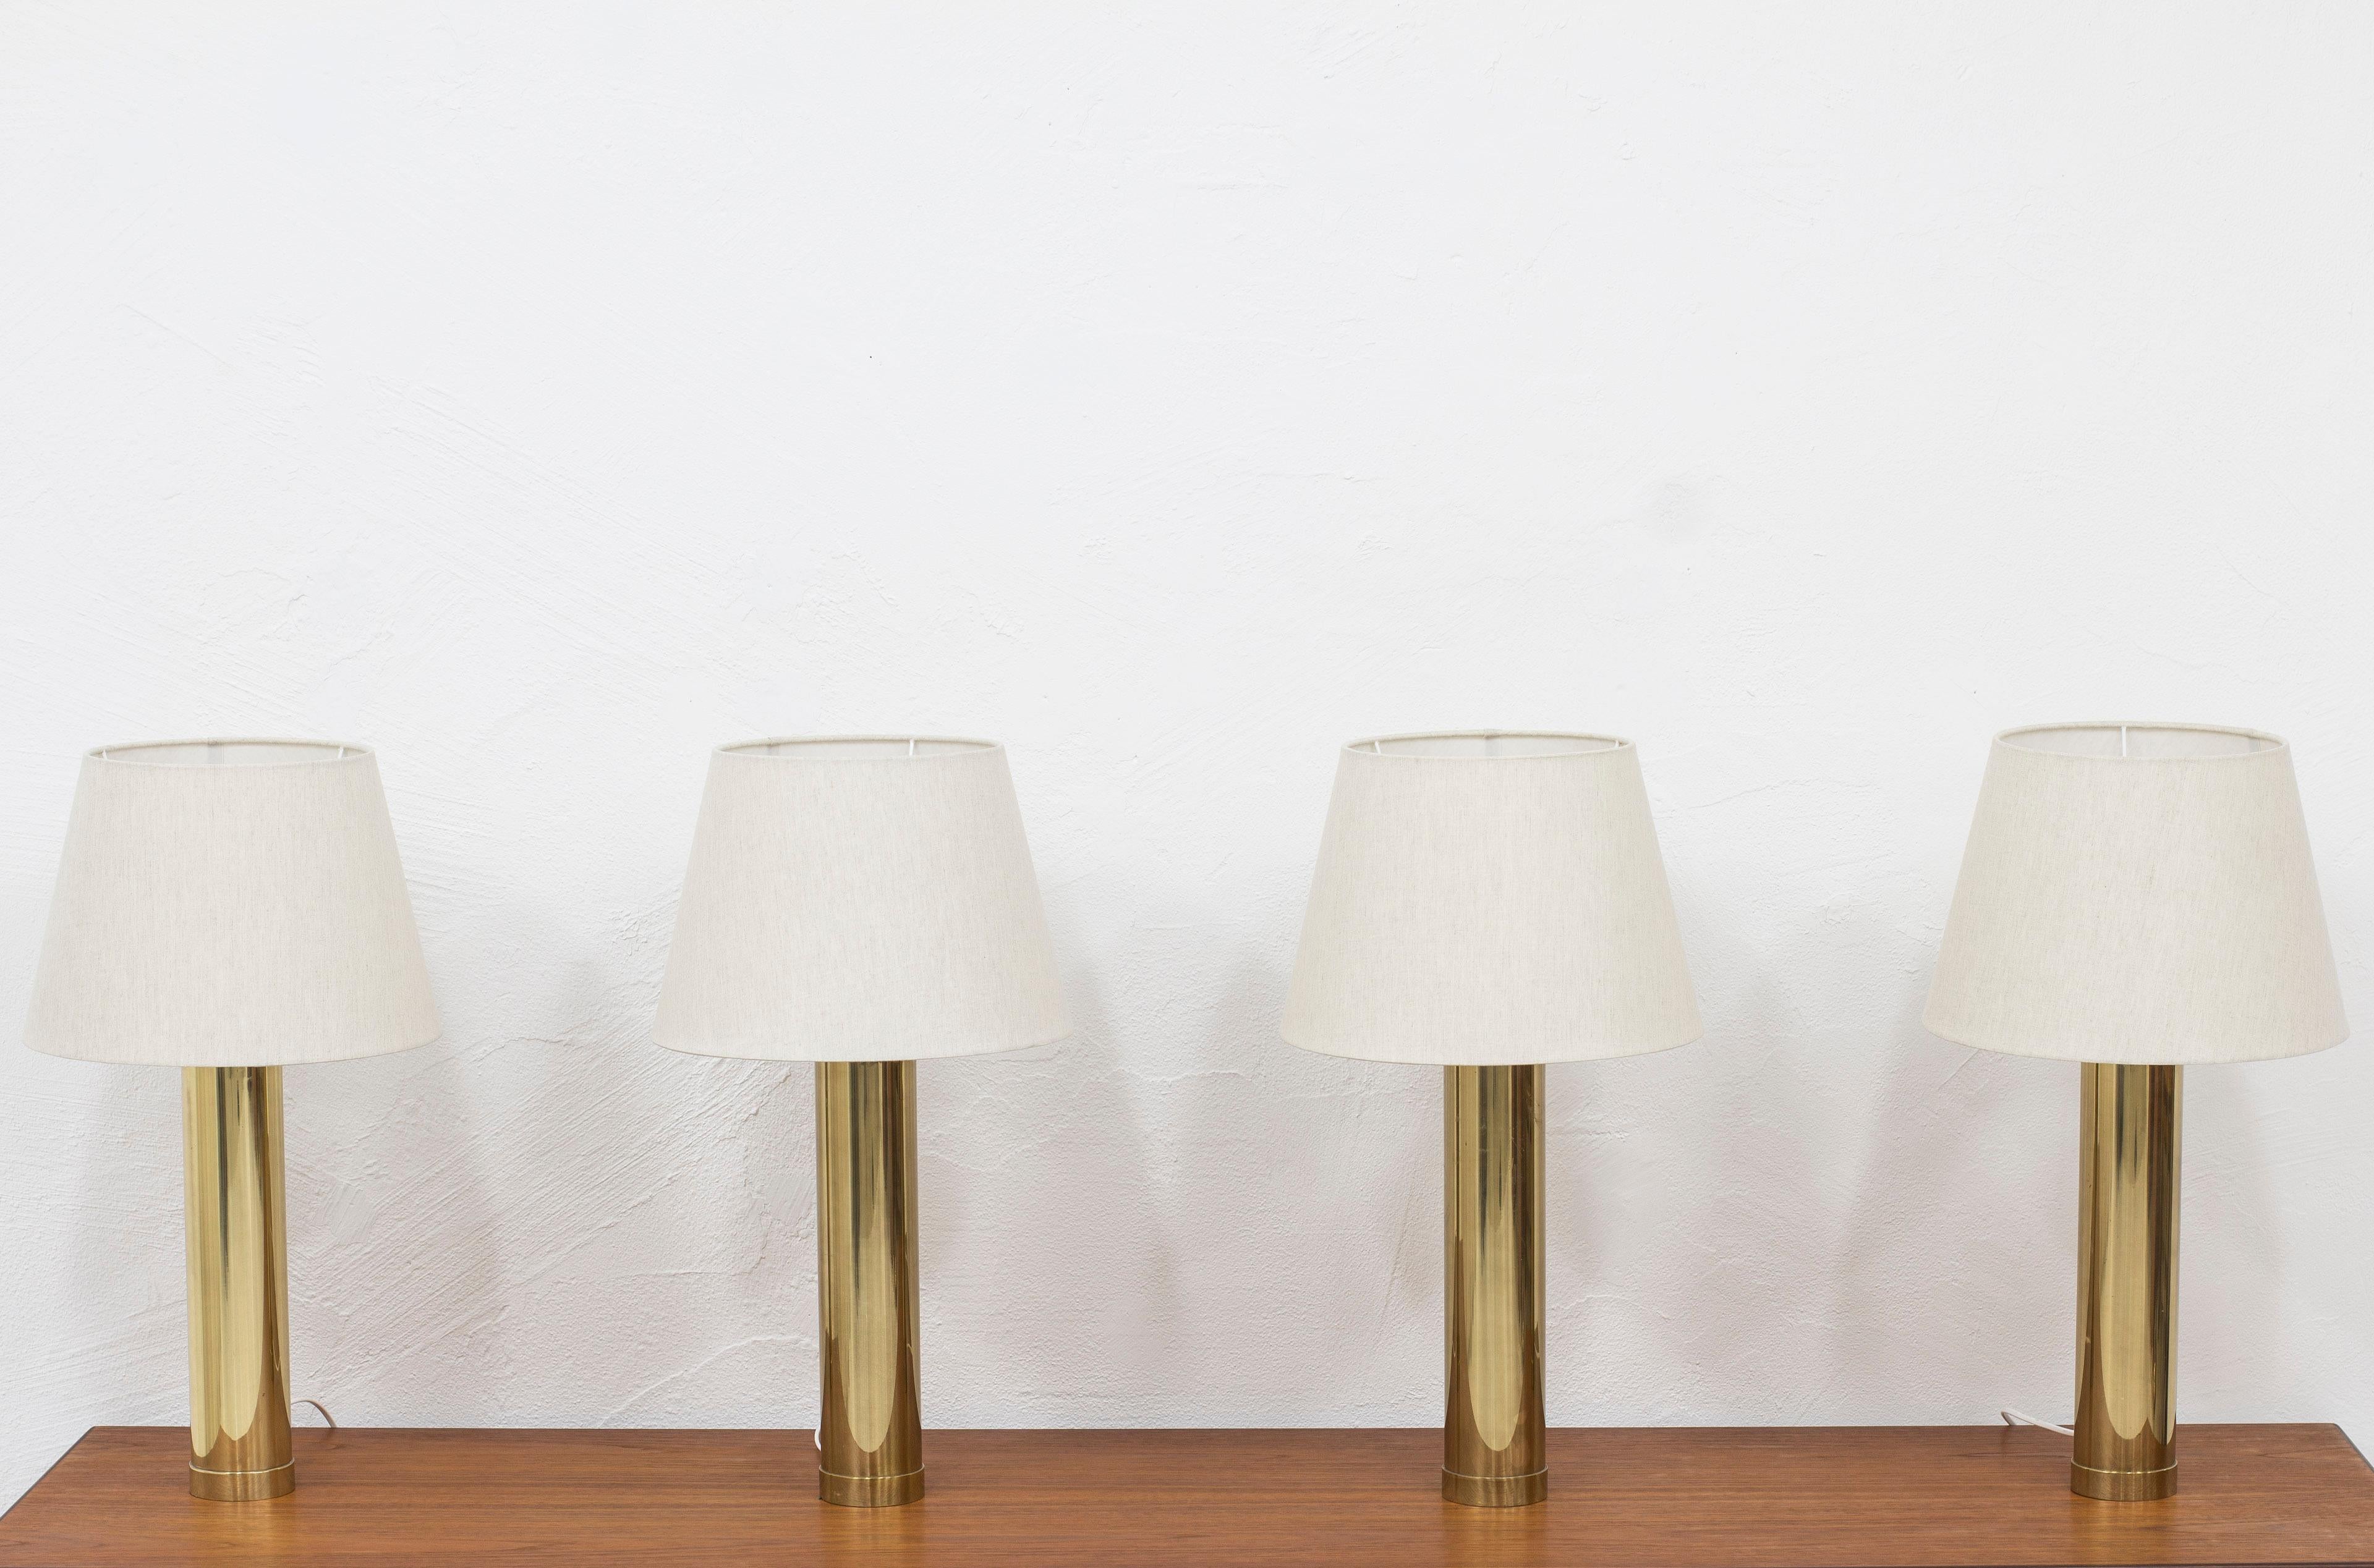 Pair of Brass Table Lamps by Bergboms, Sweden, 1960s, 4 Pcs Total For Sale 4